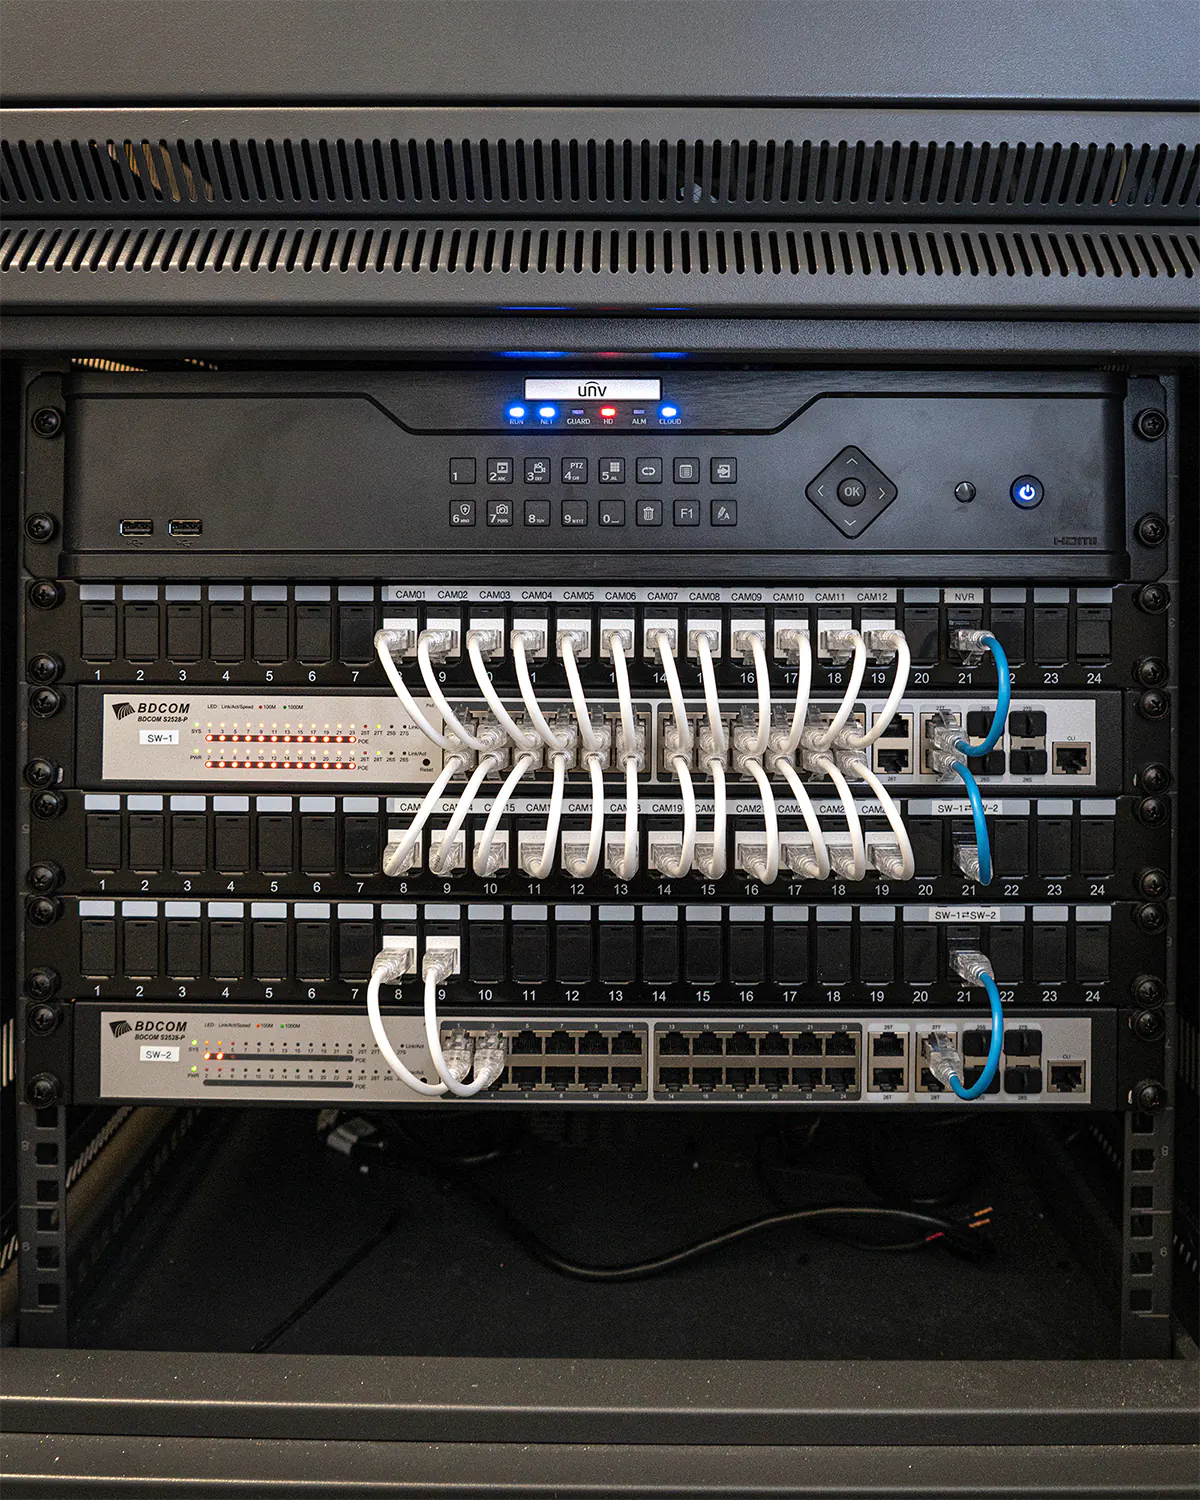 A network rack full of switches, patch panels, and networking cables